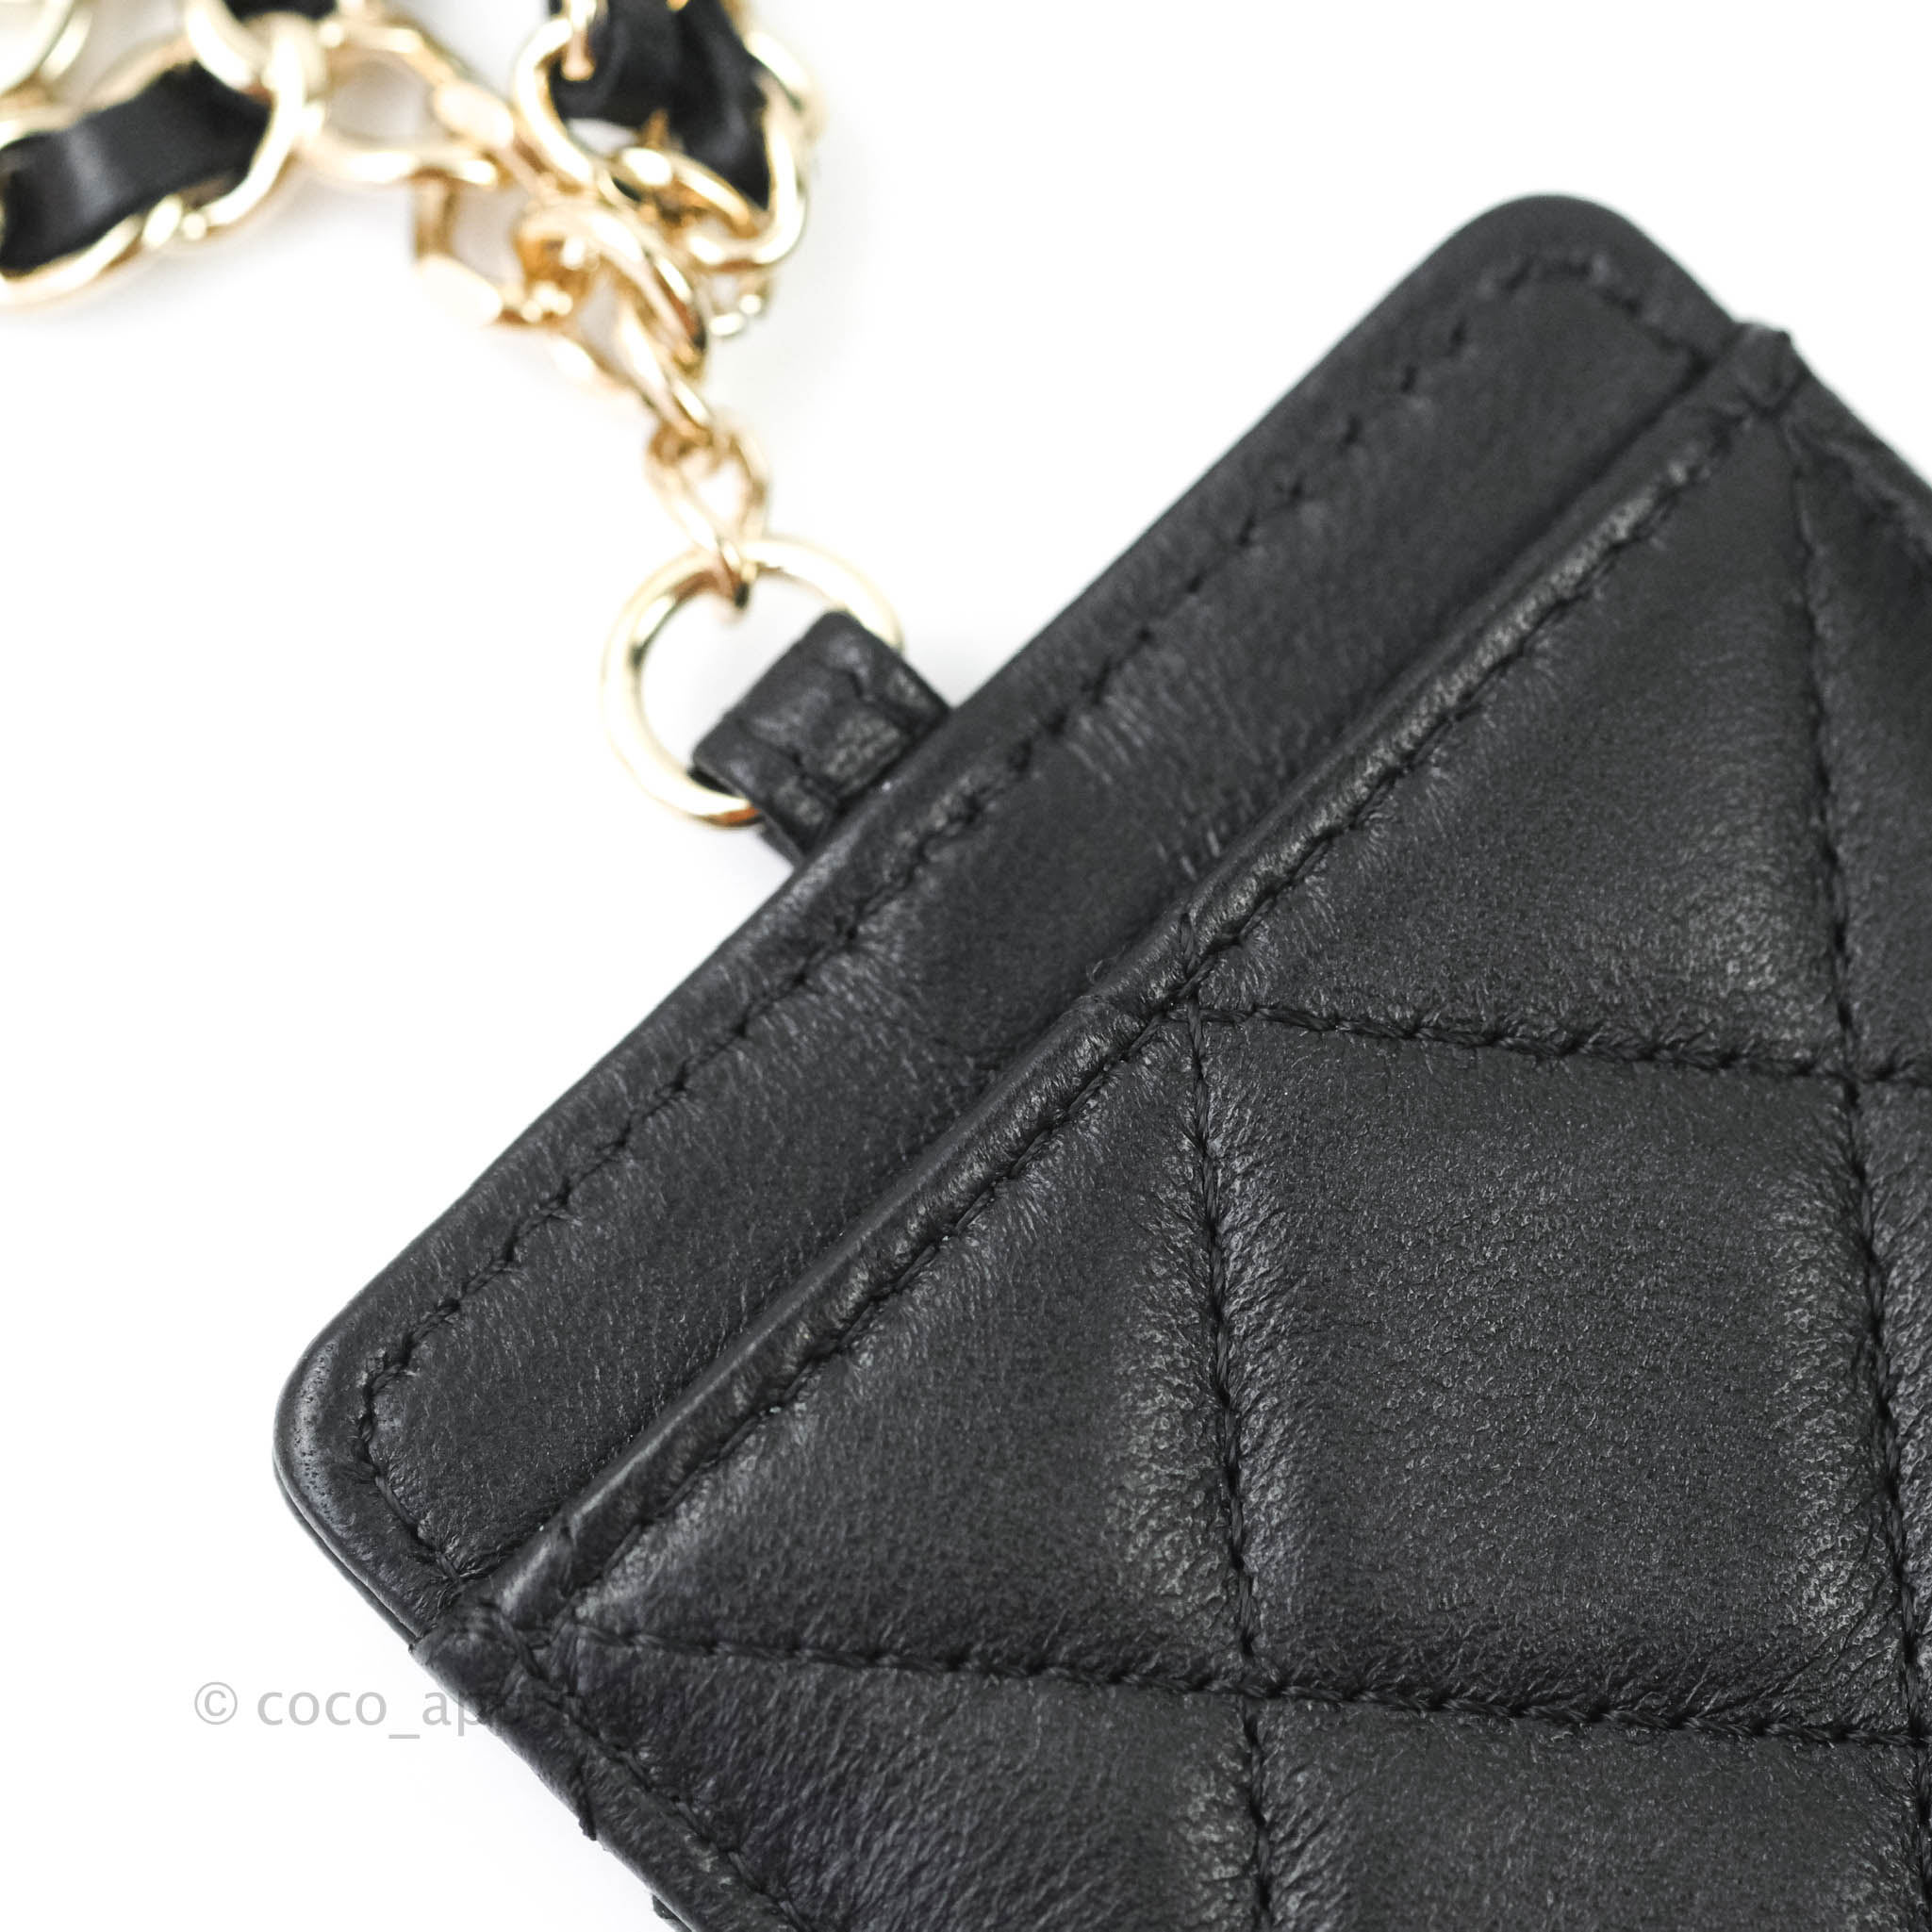 Chanel Quilted Chain Infinity Card Holder Black Lambskin Gold Hardware –  Coco Approved Studio